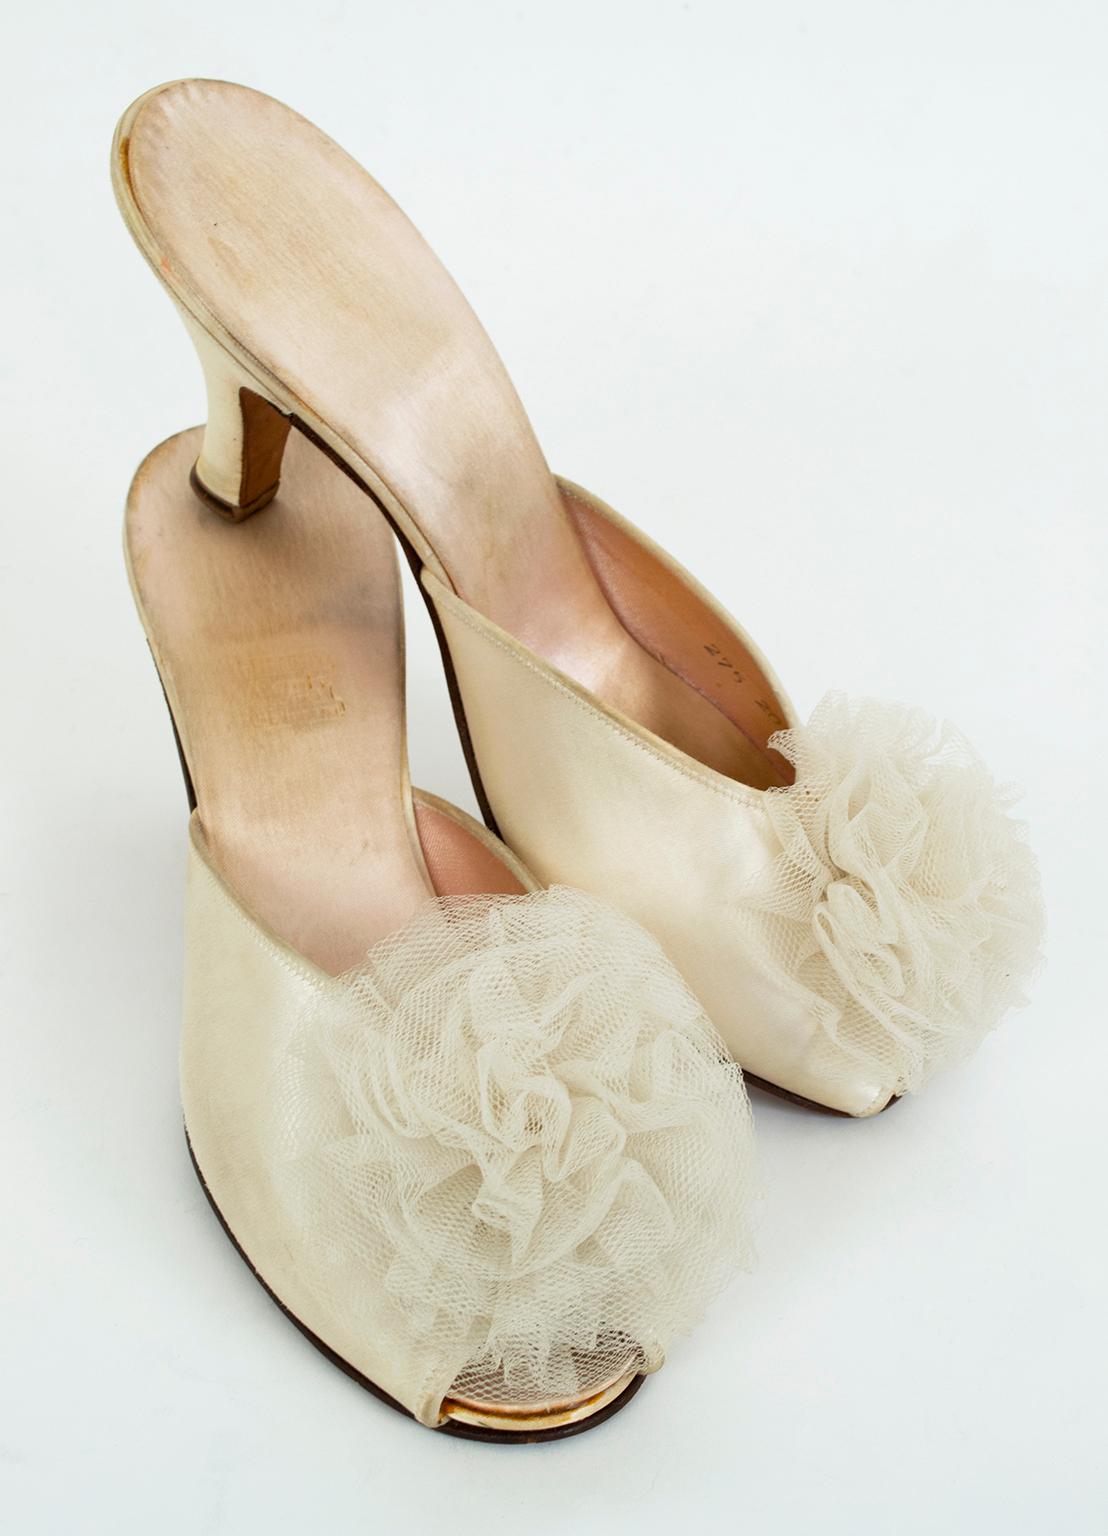 THE slipper designer of the mid-century, Daniel Green was the name wartime brides insisted upon because they were unrationed and for many, the only “new” thing they could enjoy on their wedding day. The “crème de la crème” of boudoir slippers, this